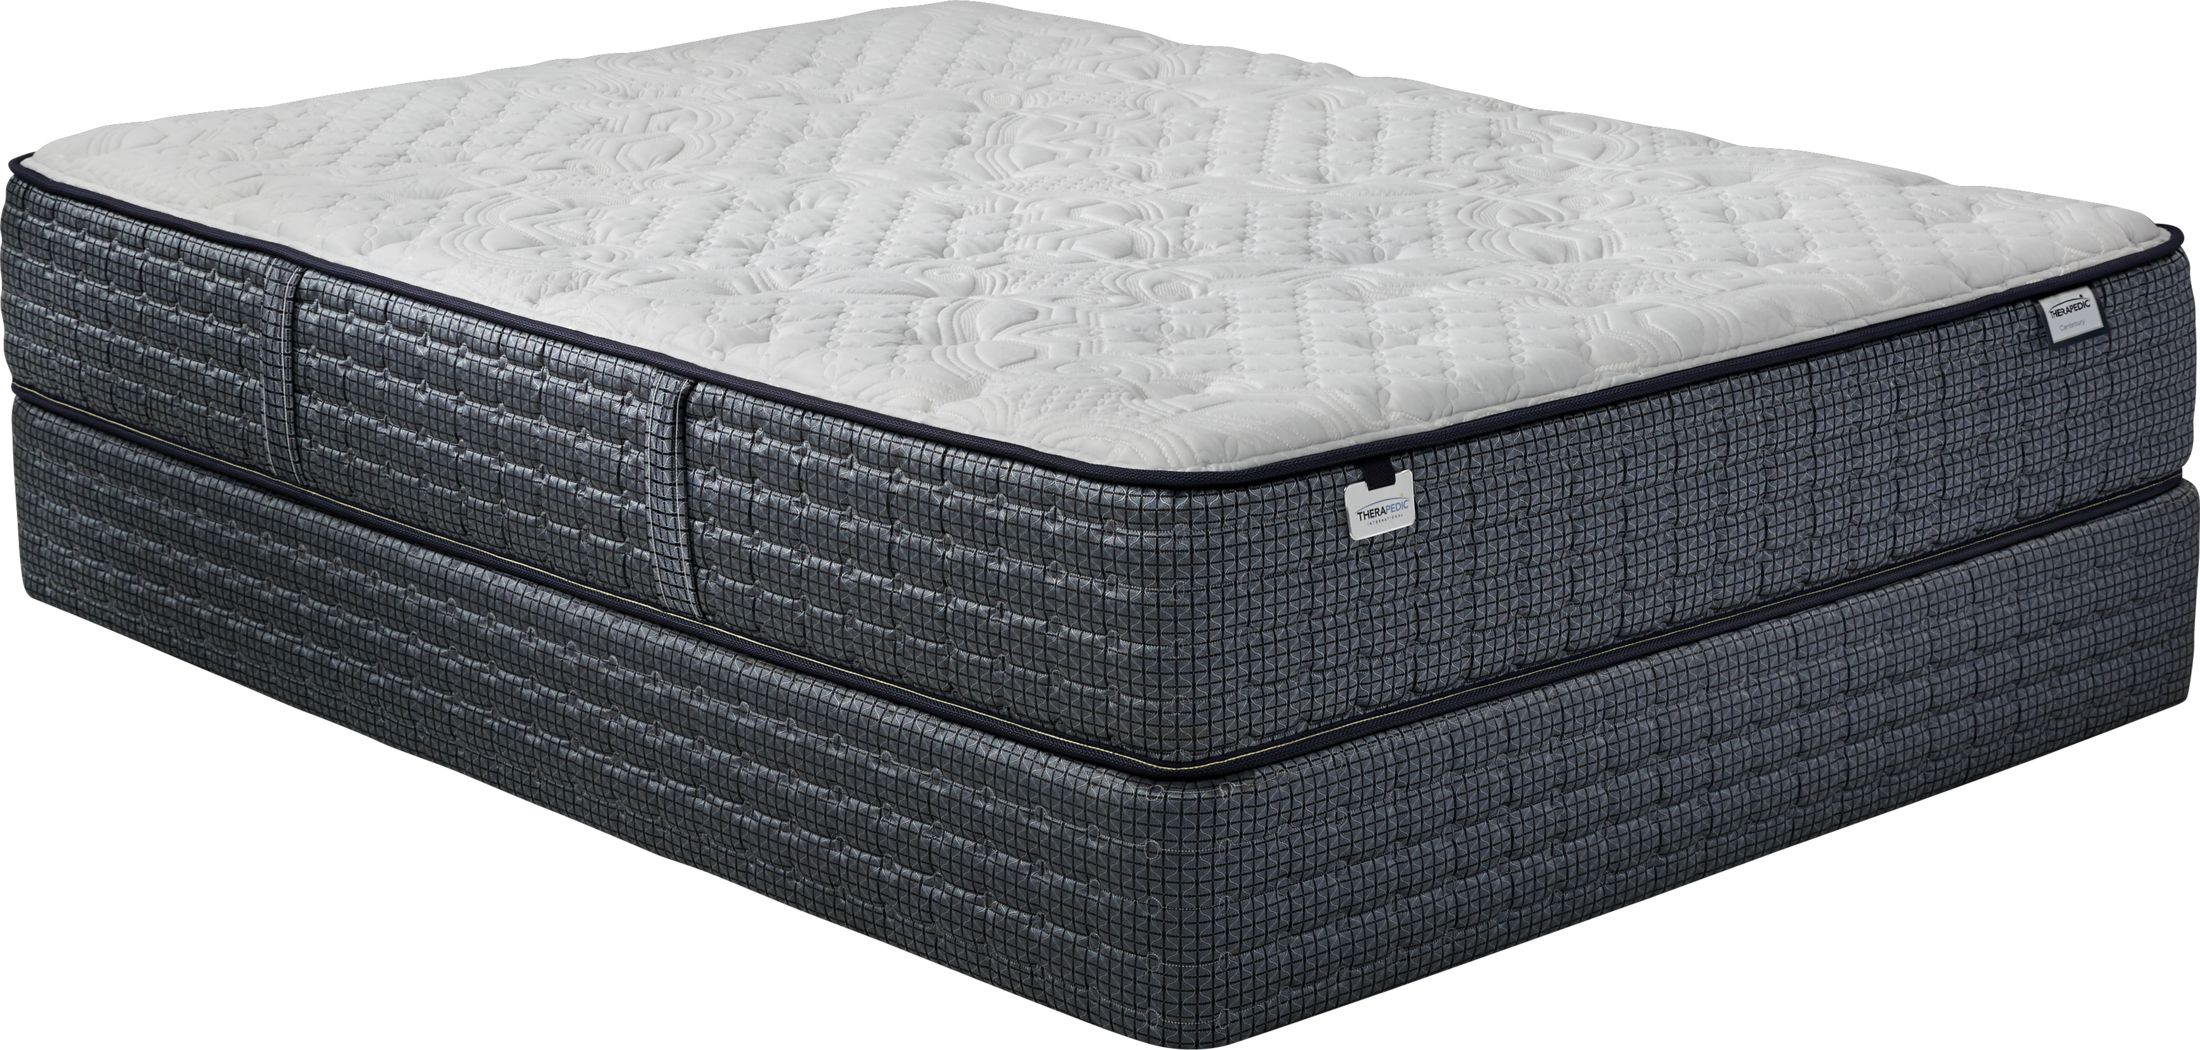 5 therapeutic mattress queen size